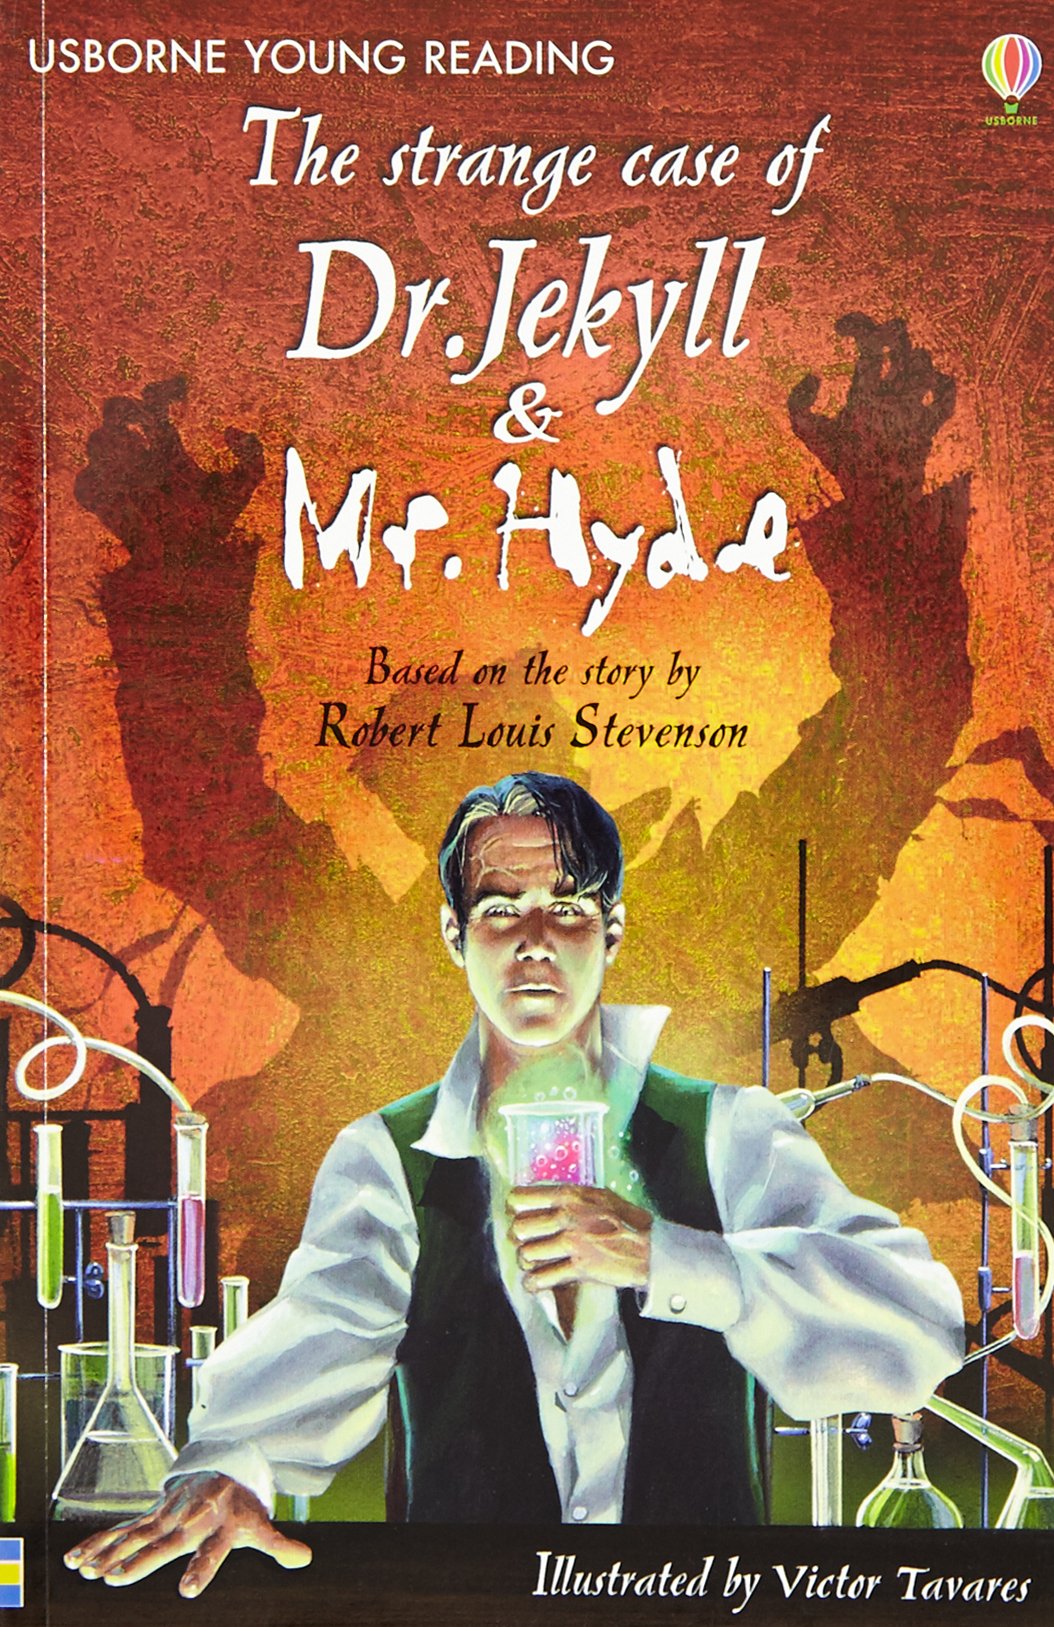 The Strange Case of Dr. Jekyll & Mr. Hyde (Usborne Young Reading)